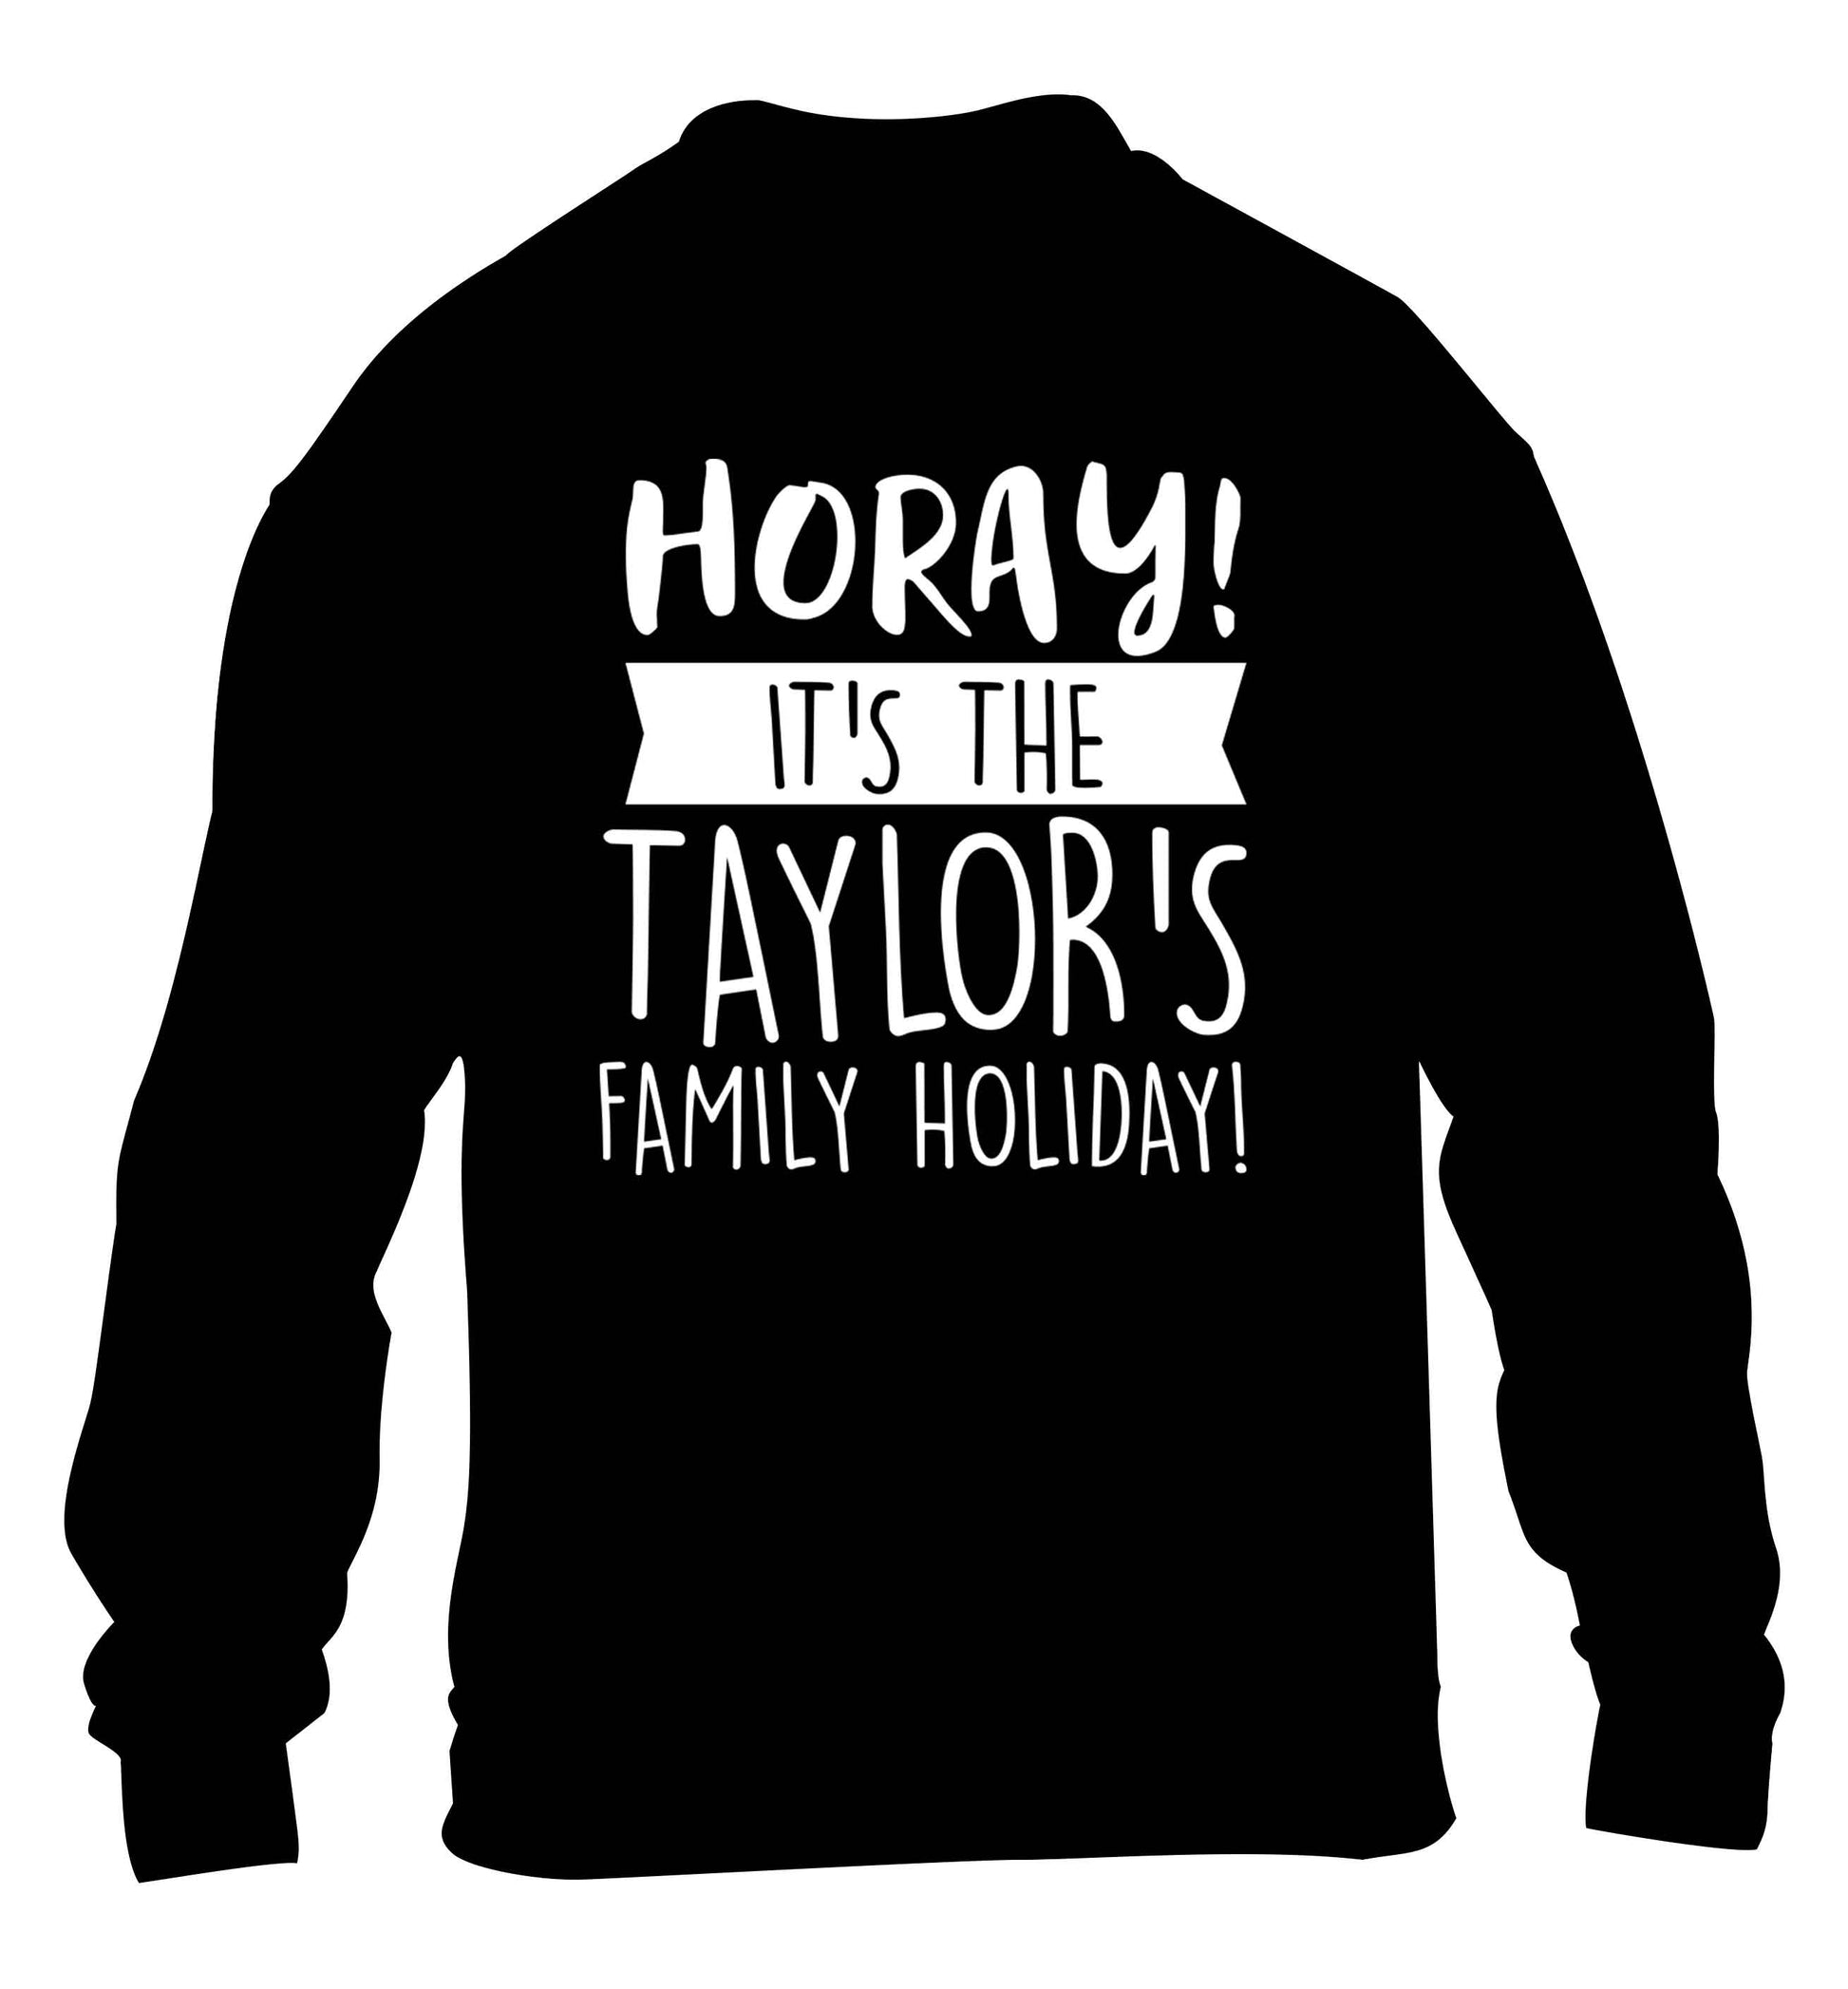 Horay it's the Taylor's family holiday! personalised item children's black sweater 12-13 Years